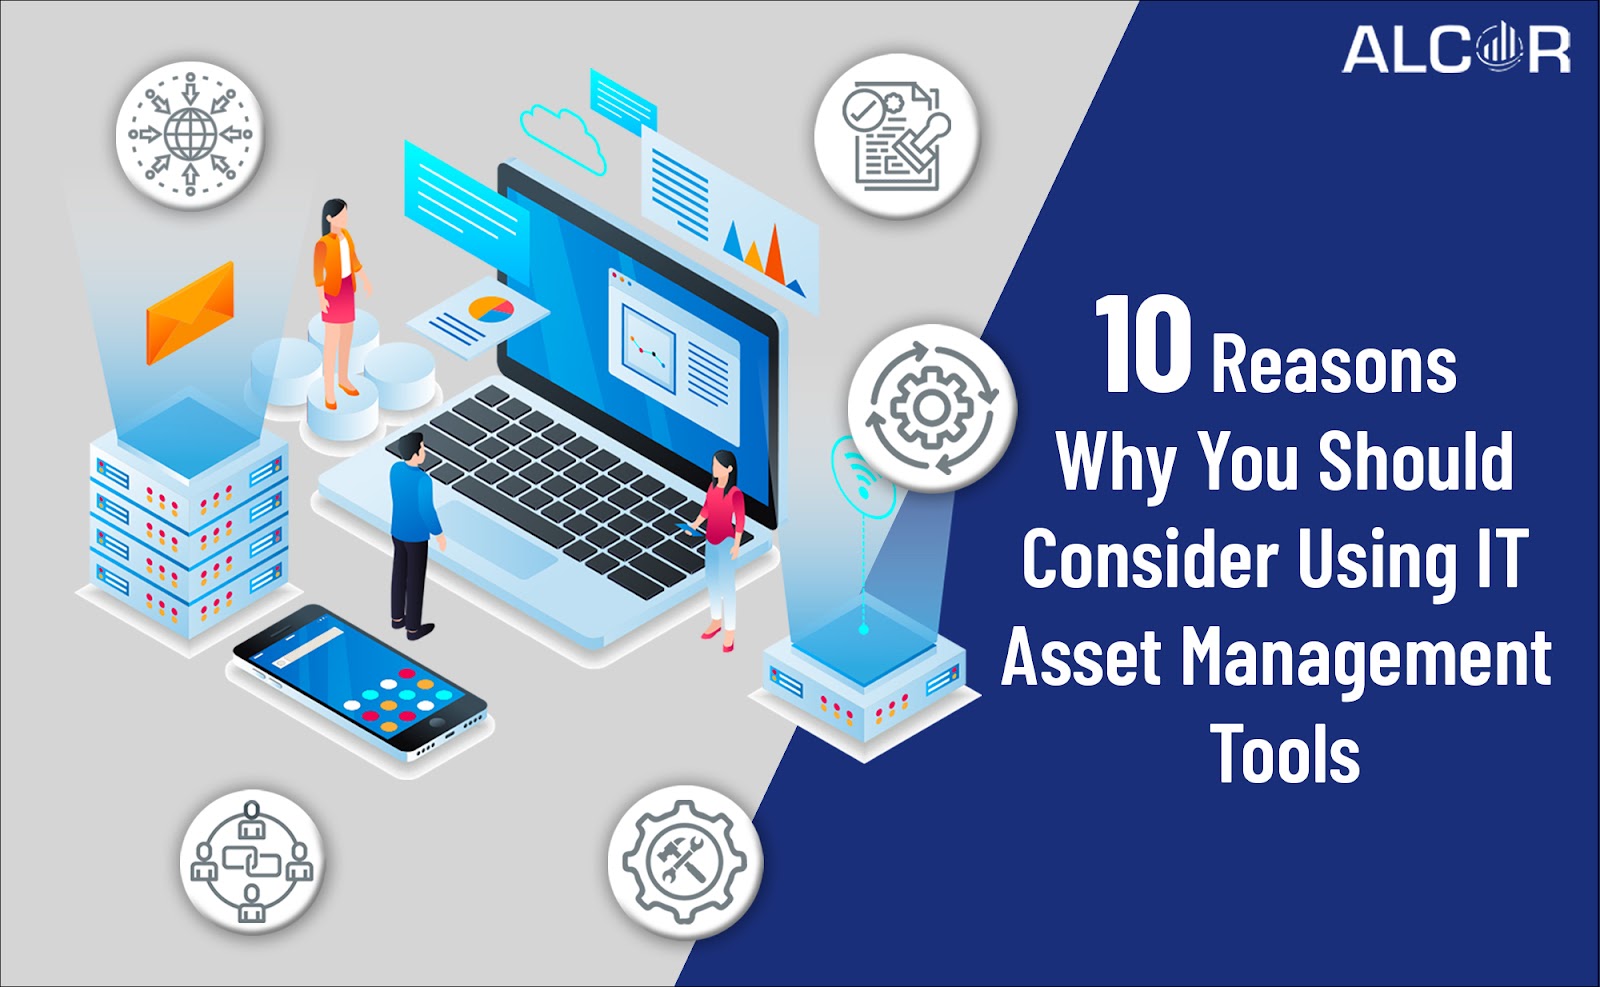 10 Reasons Why You Should Consider Using IT Asset Management Tools